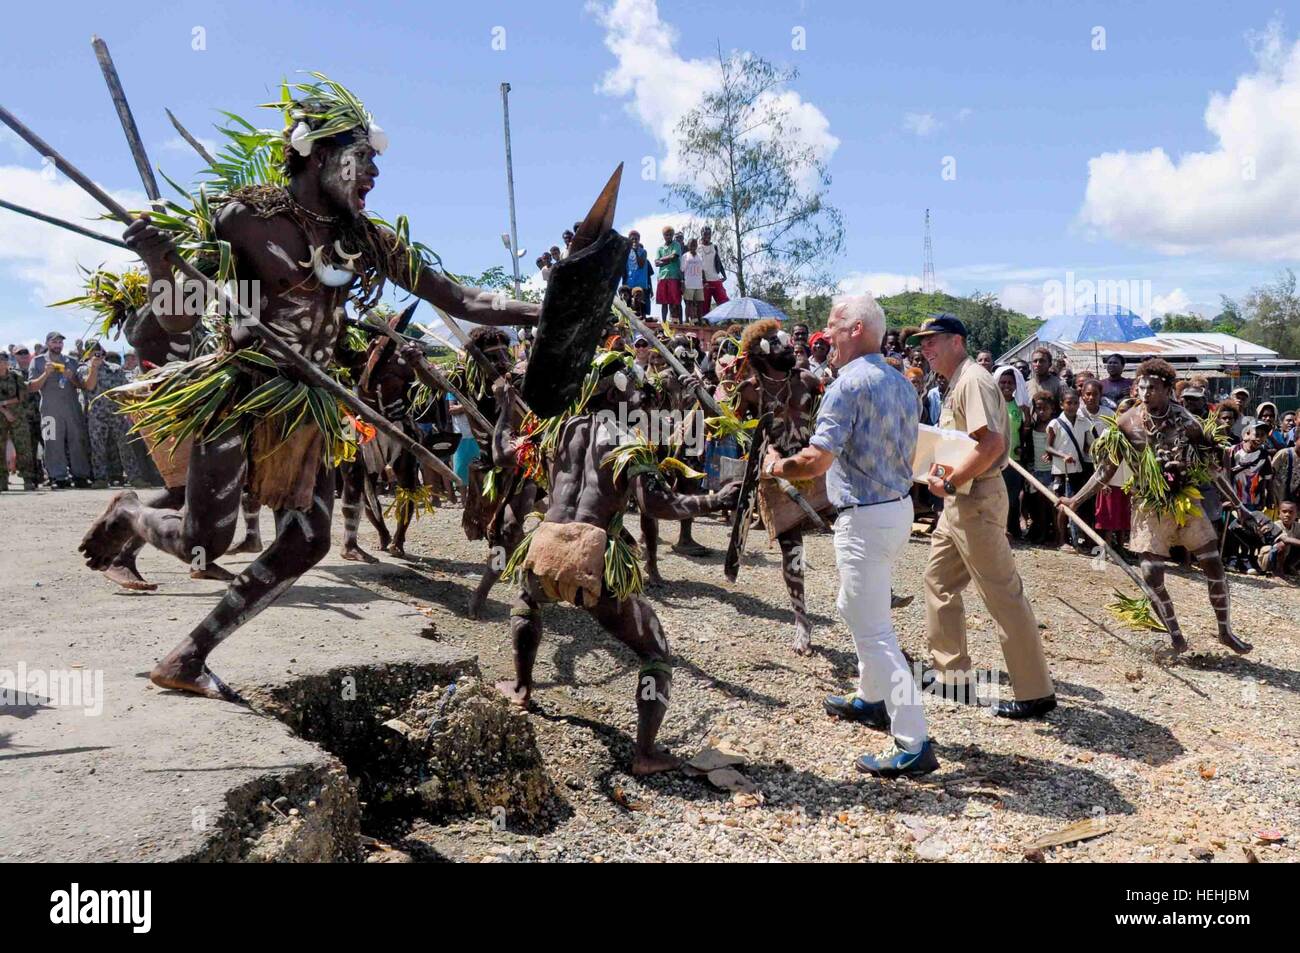 Pacific Partnership Mission Commander Andrew Cully and U.S. Charge d'Affaires Paul Berg receive a traditional warriors welcome from the Malaita Island tribe villagers during a Pacific Partnership humanitarian event August 10, 2009 in Auki, Solomon Islands. Stock Photo